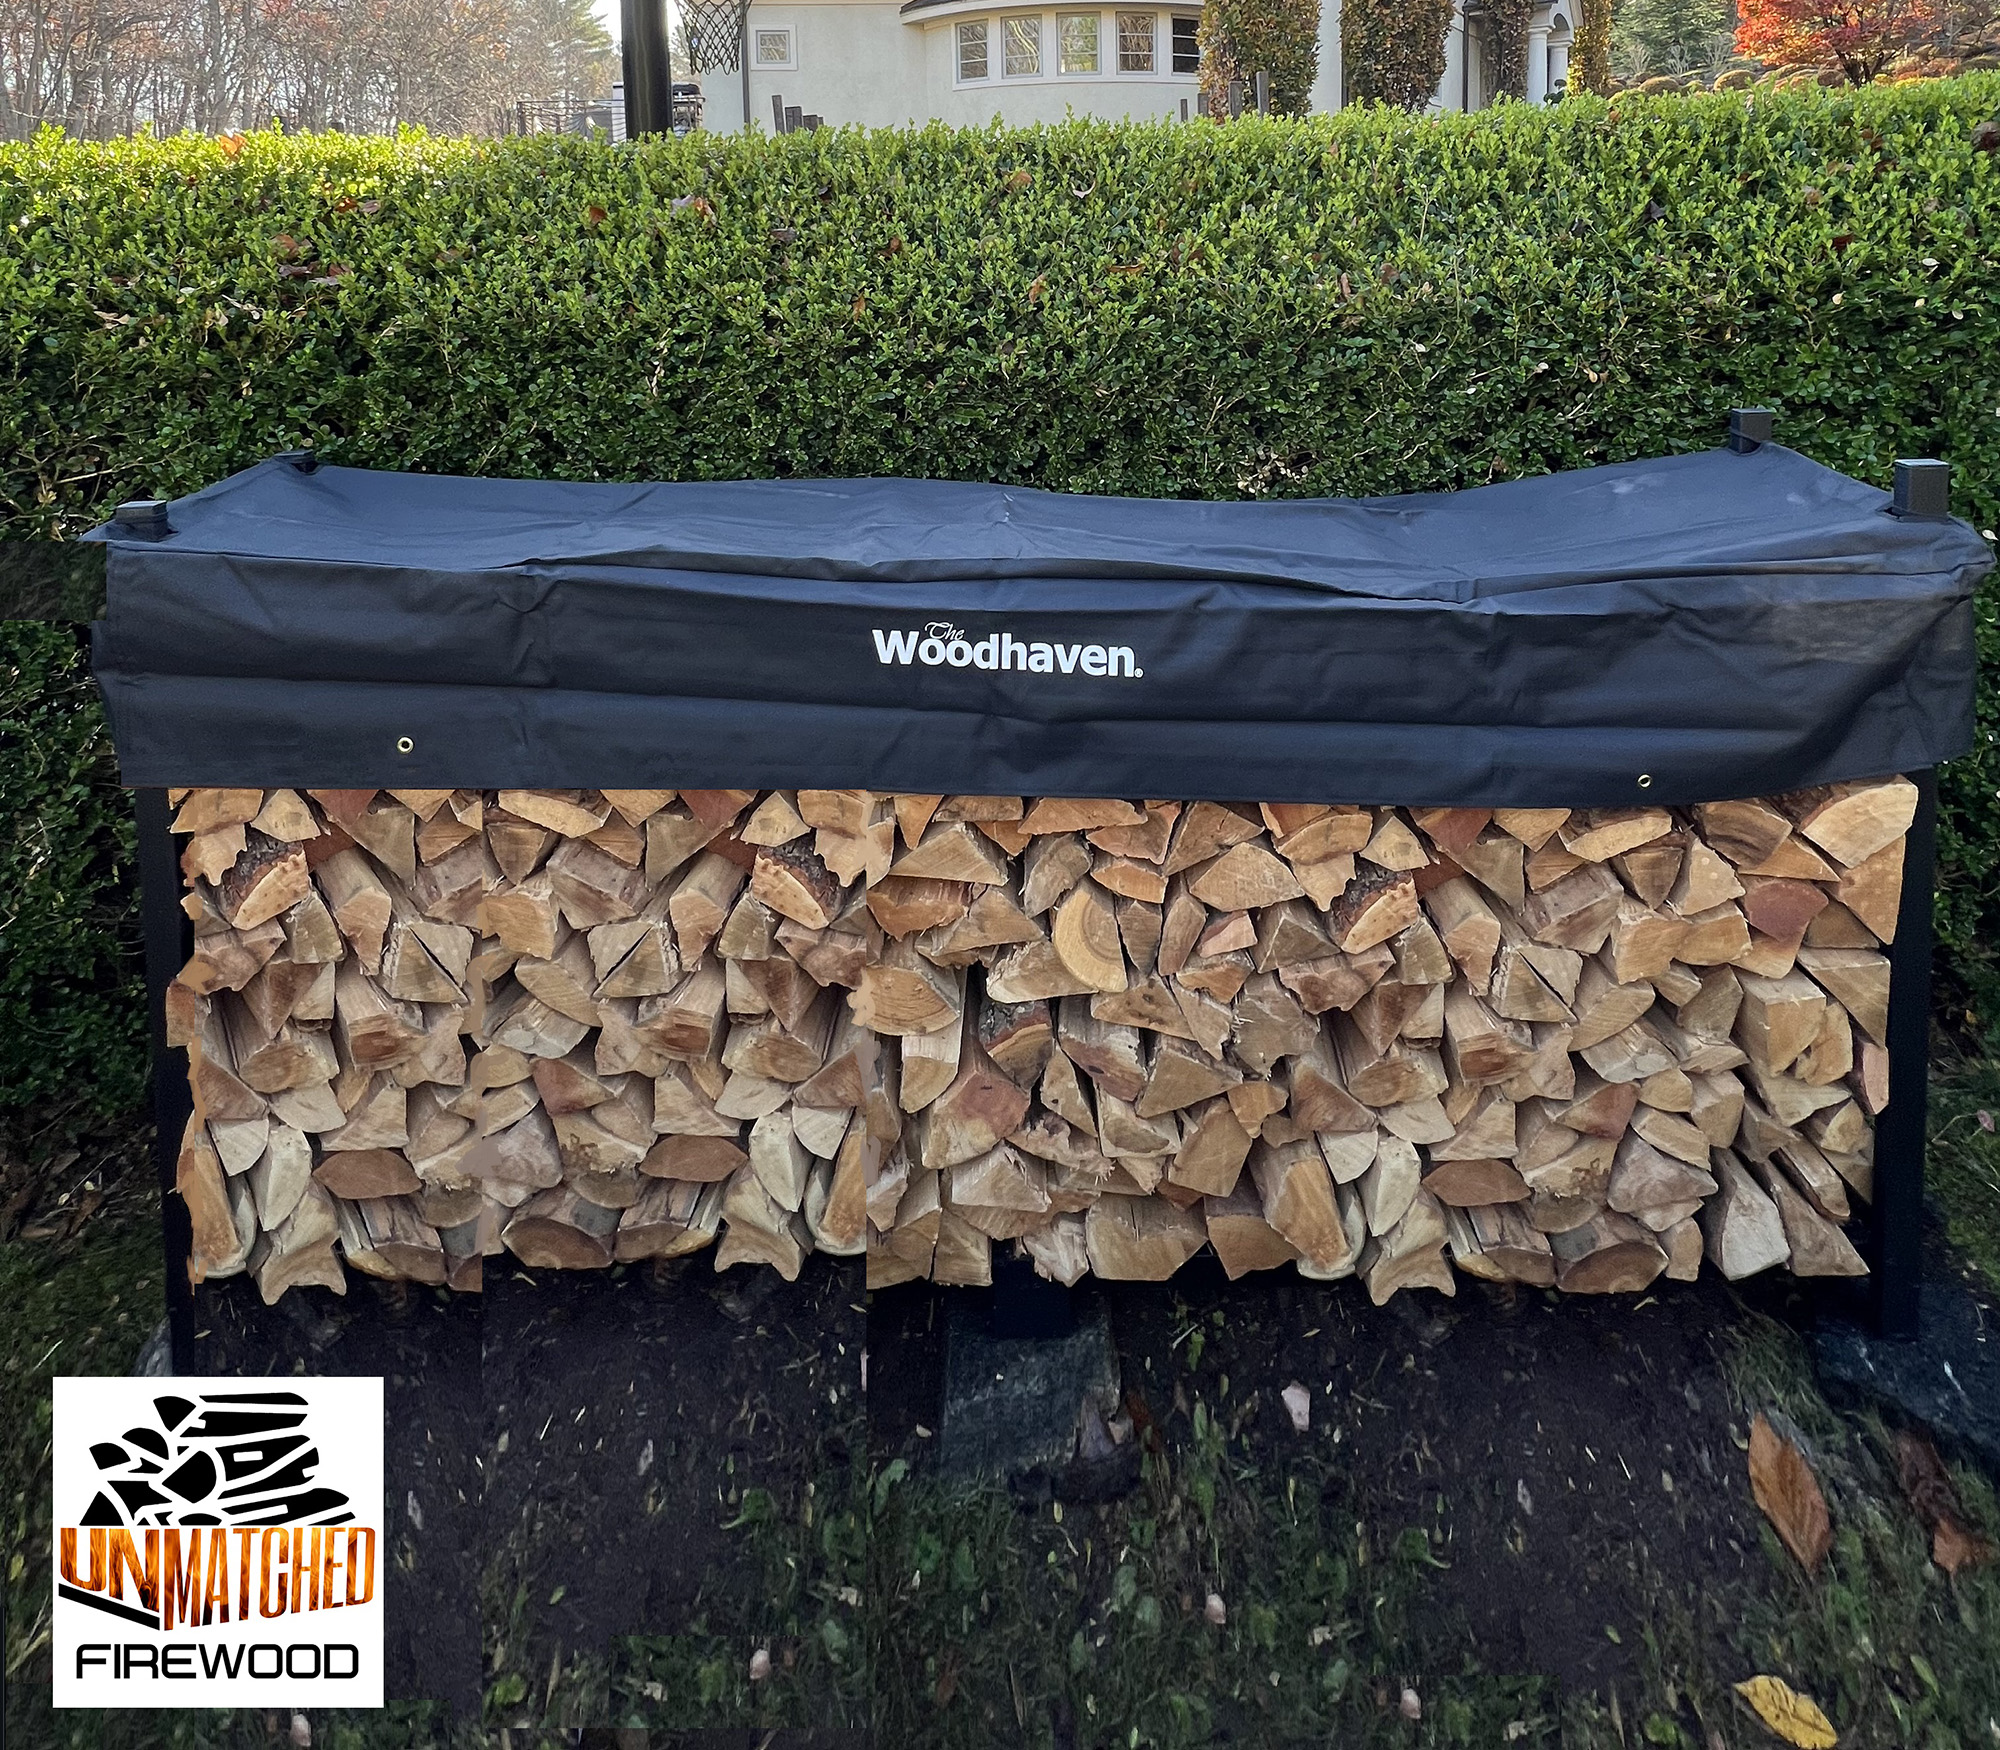 Unmatched Firewood: Cos Cob Firewood